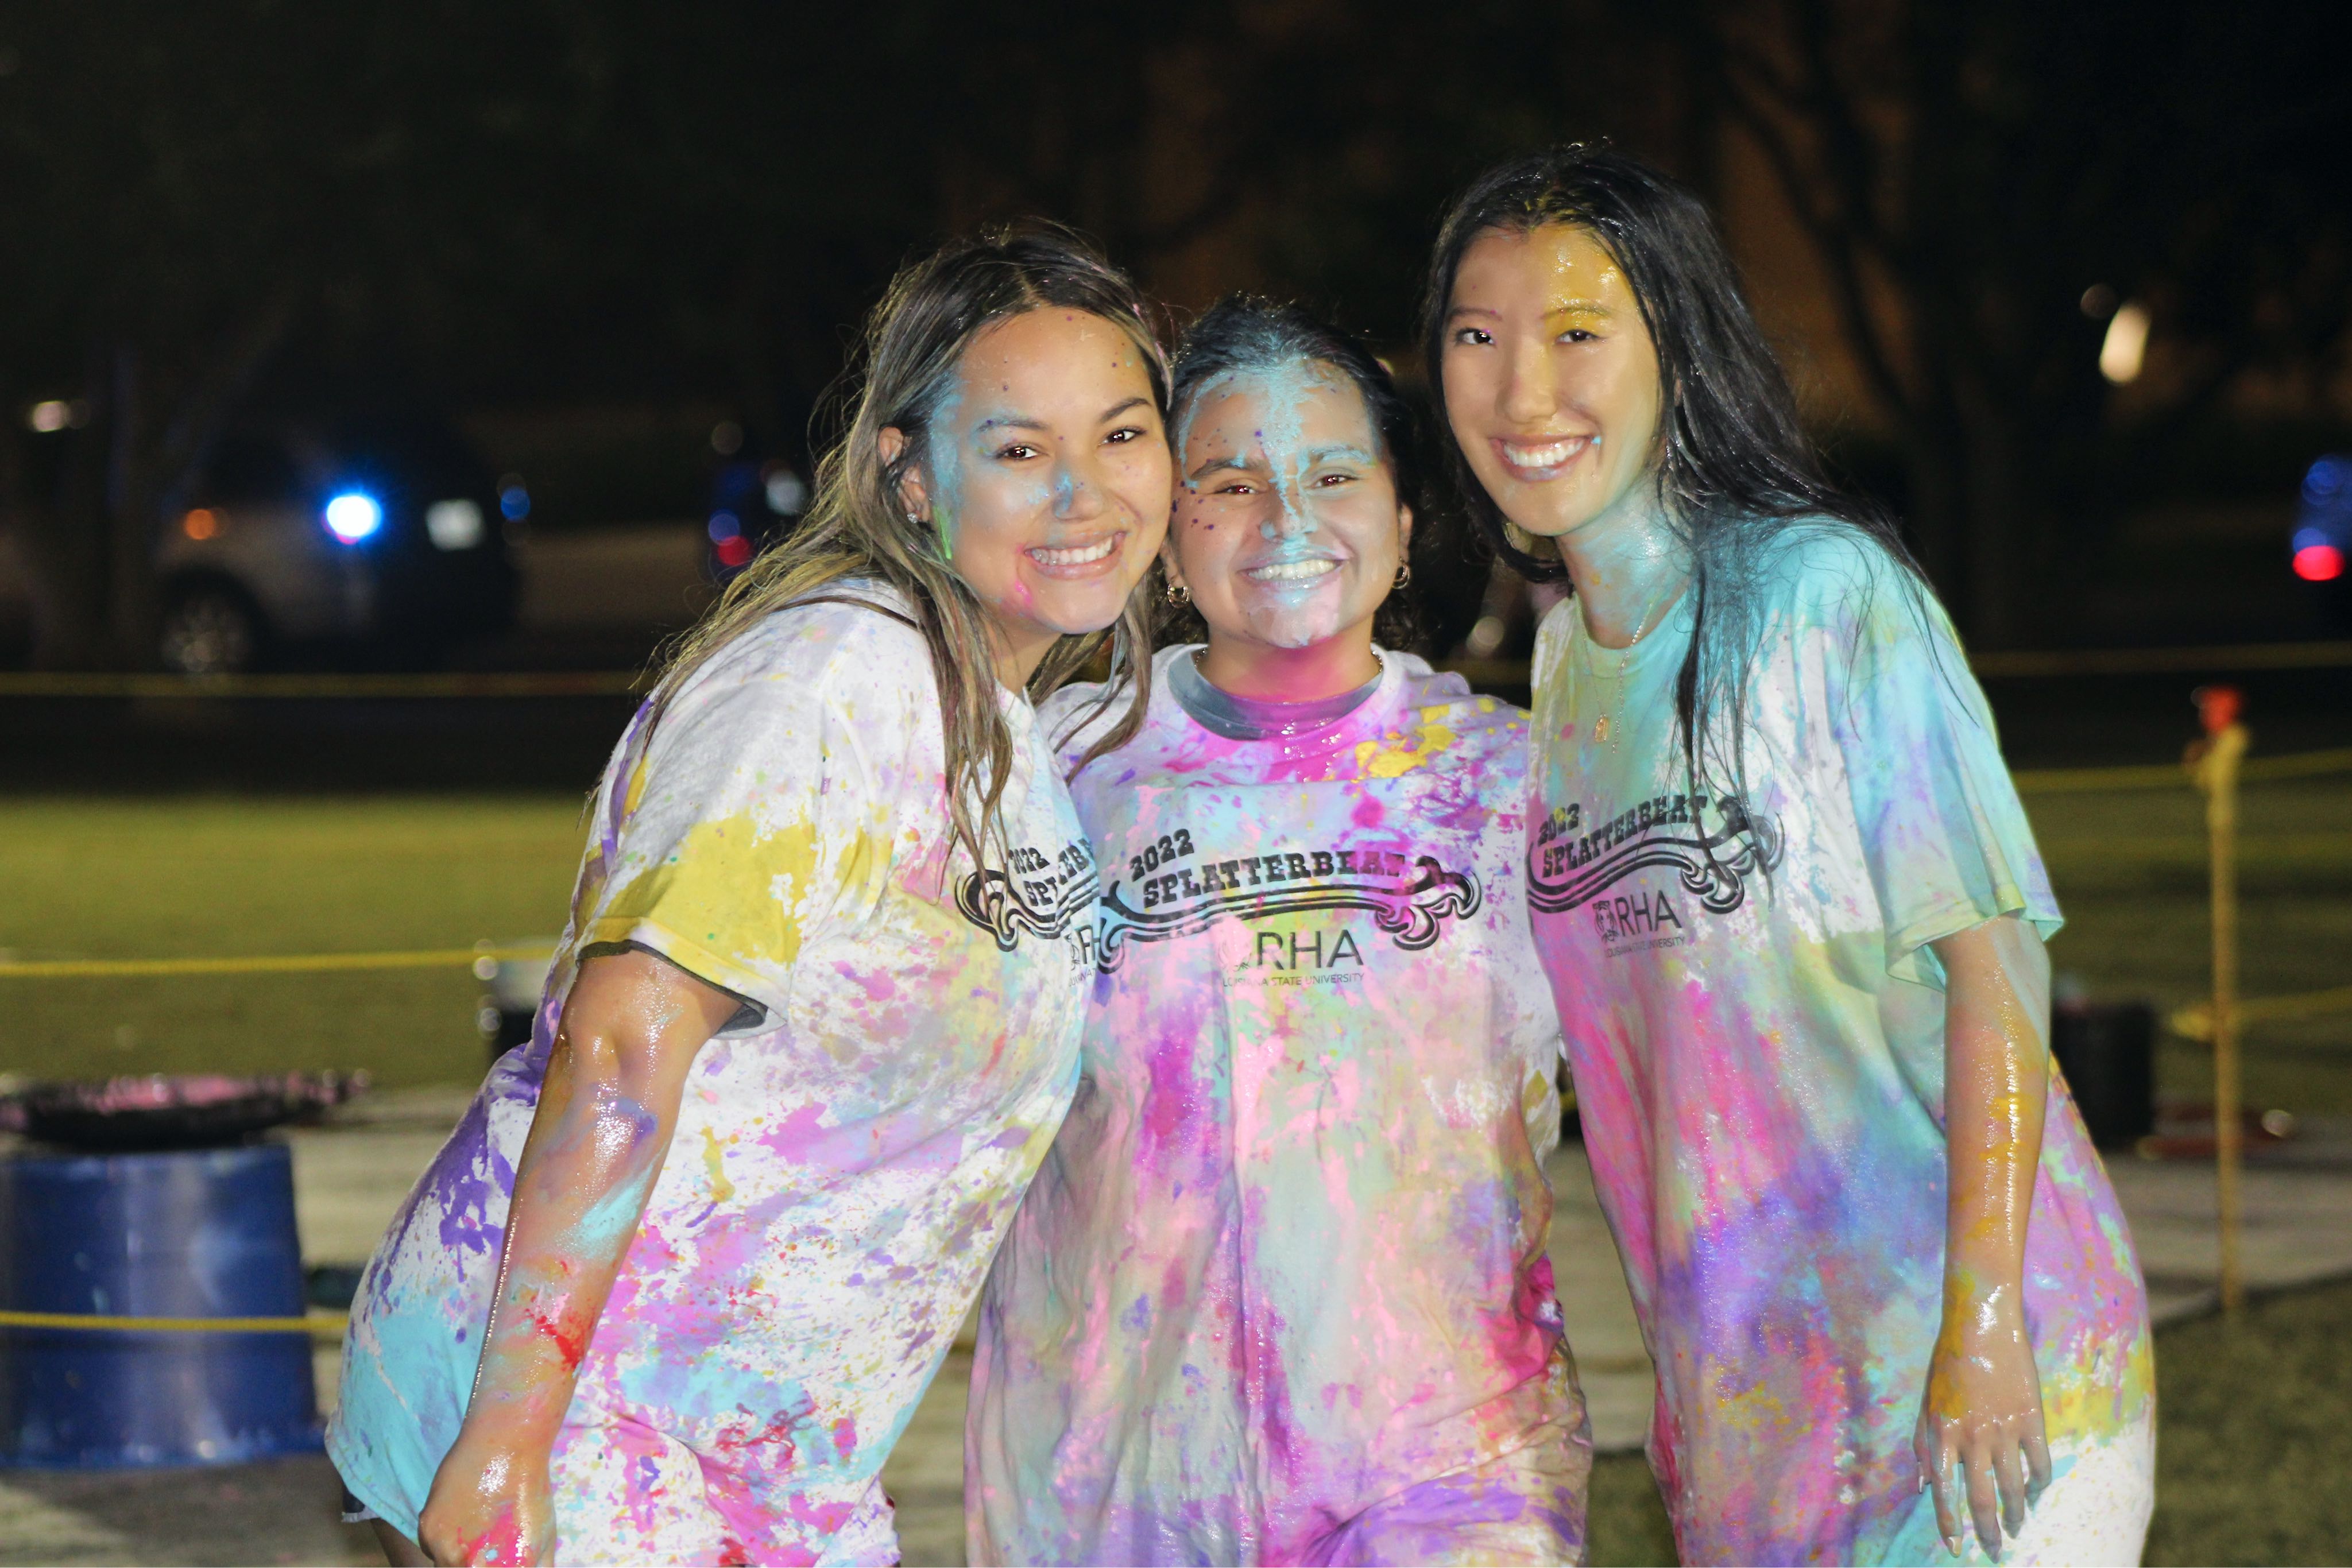 Paint-covered students posing for a picture at Splatterbeat.